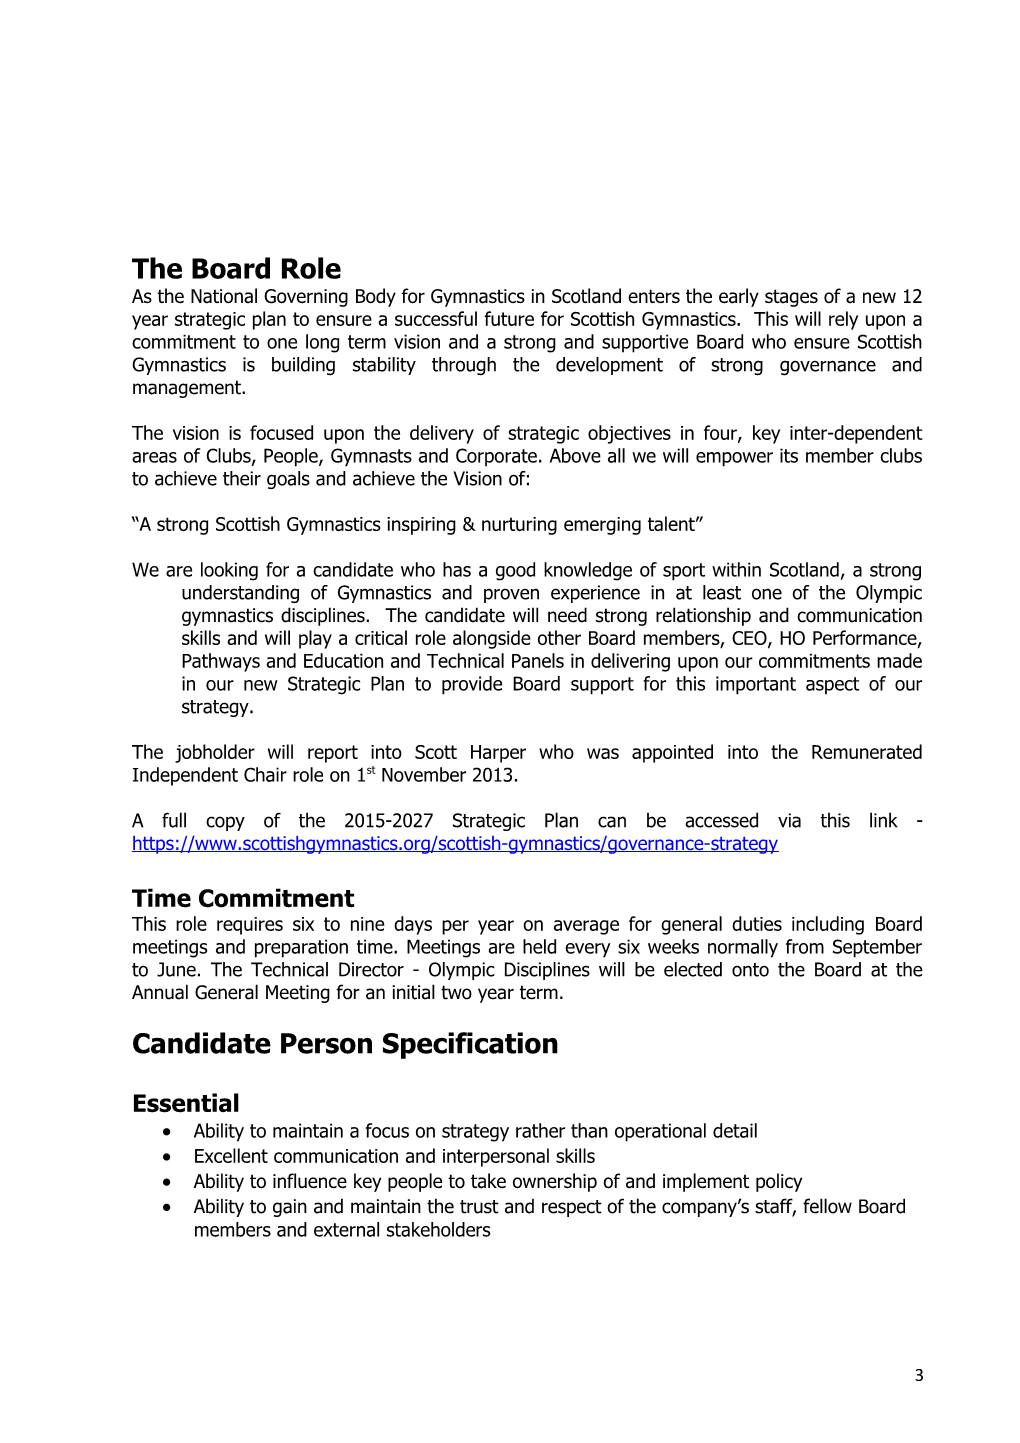 The Board Role & Time Commitment3